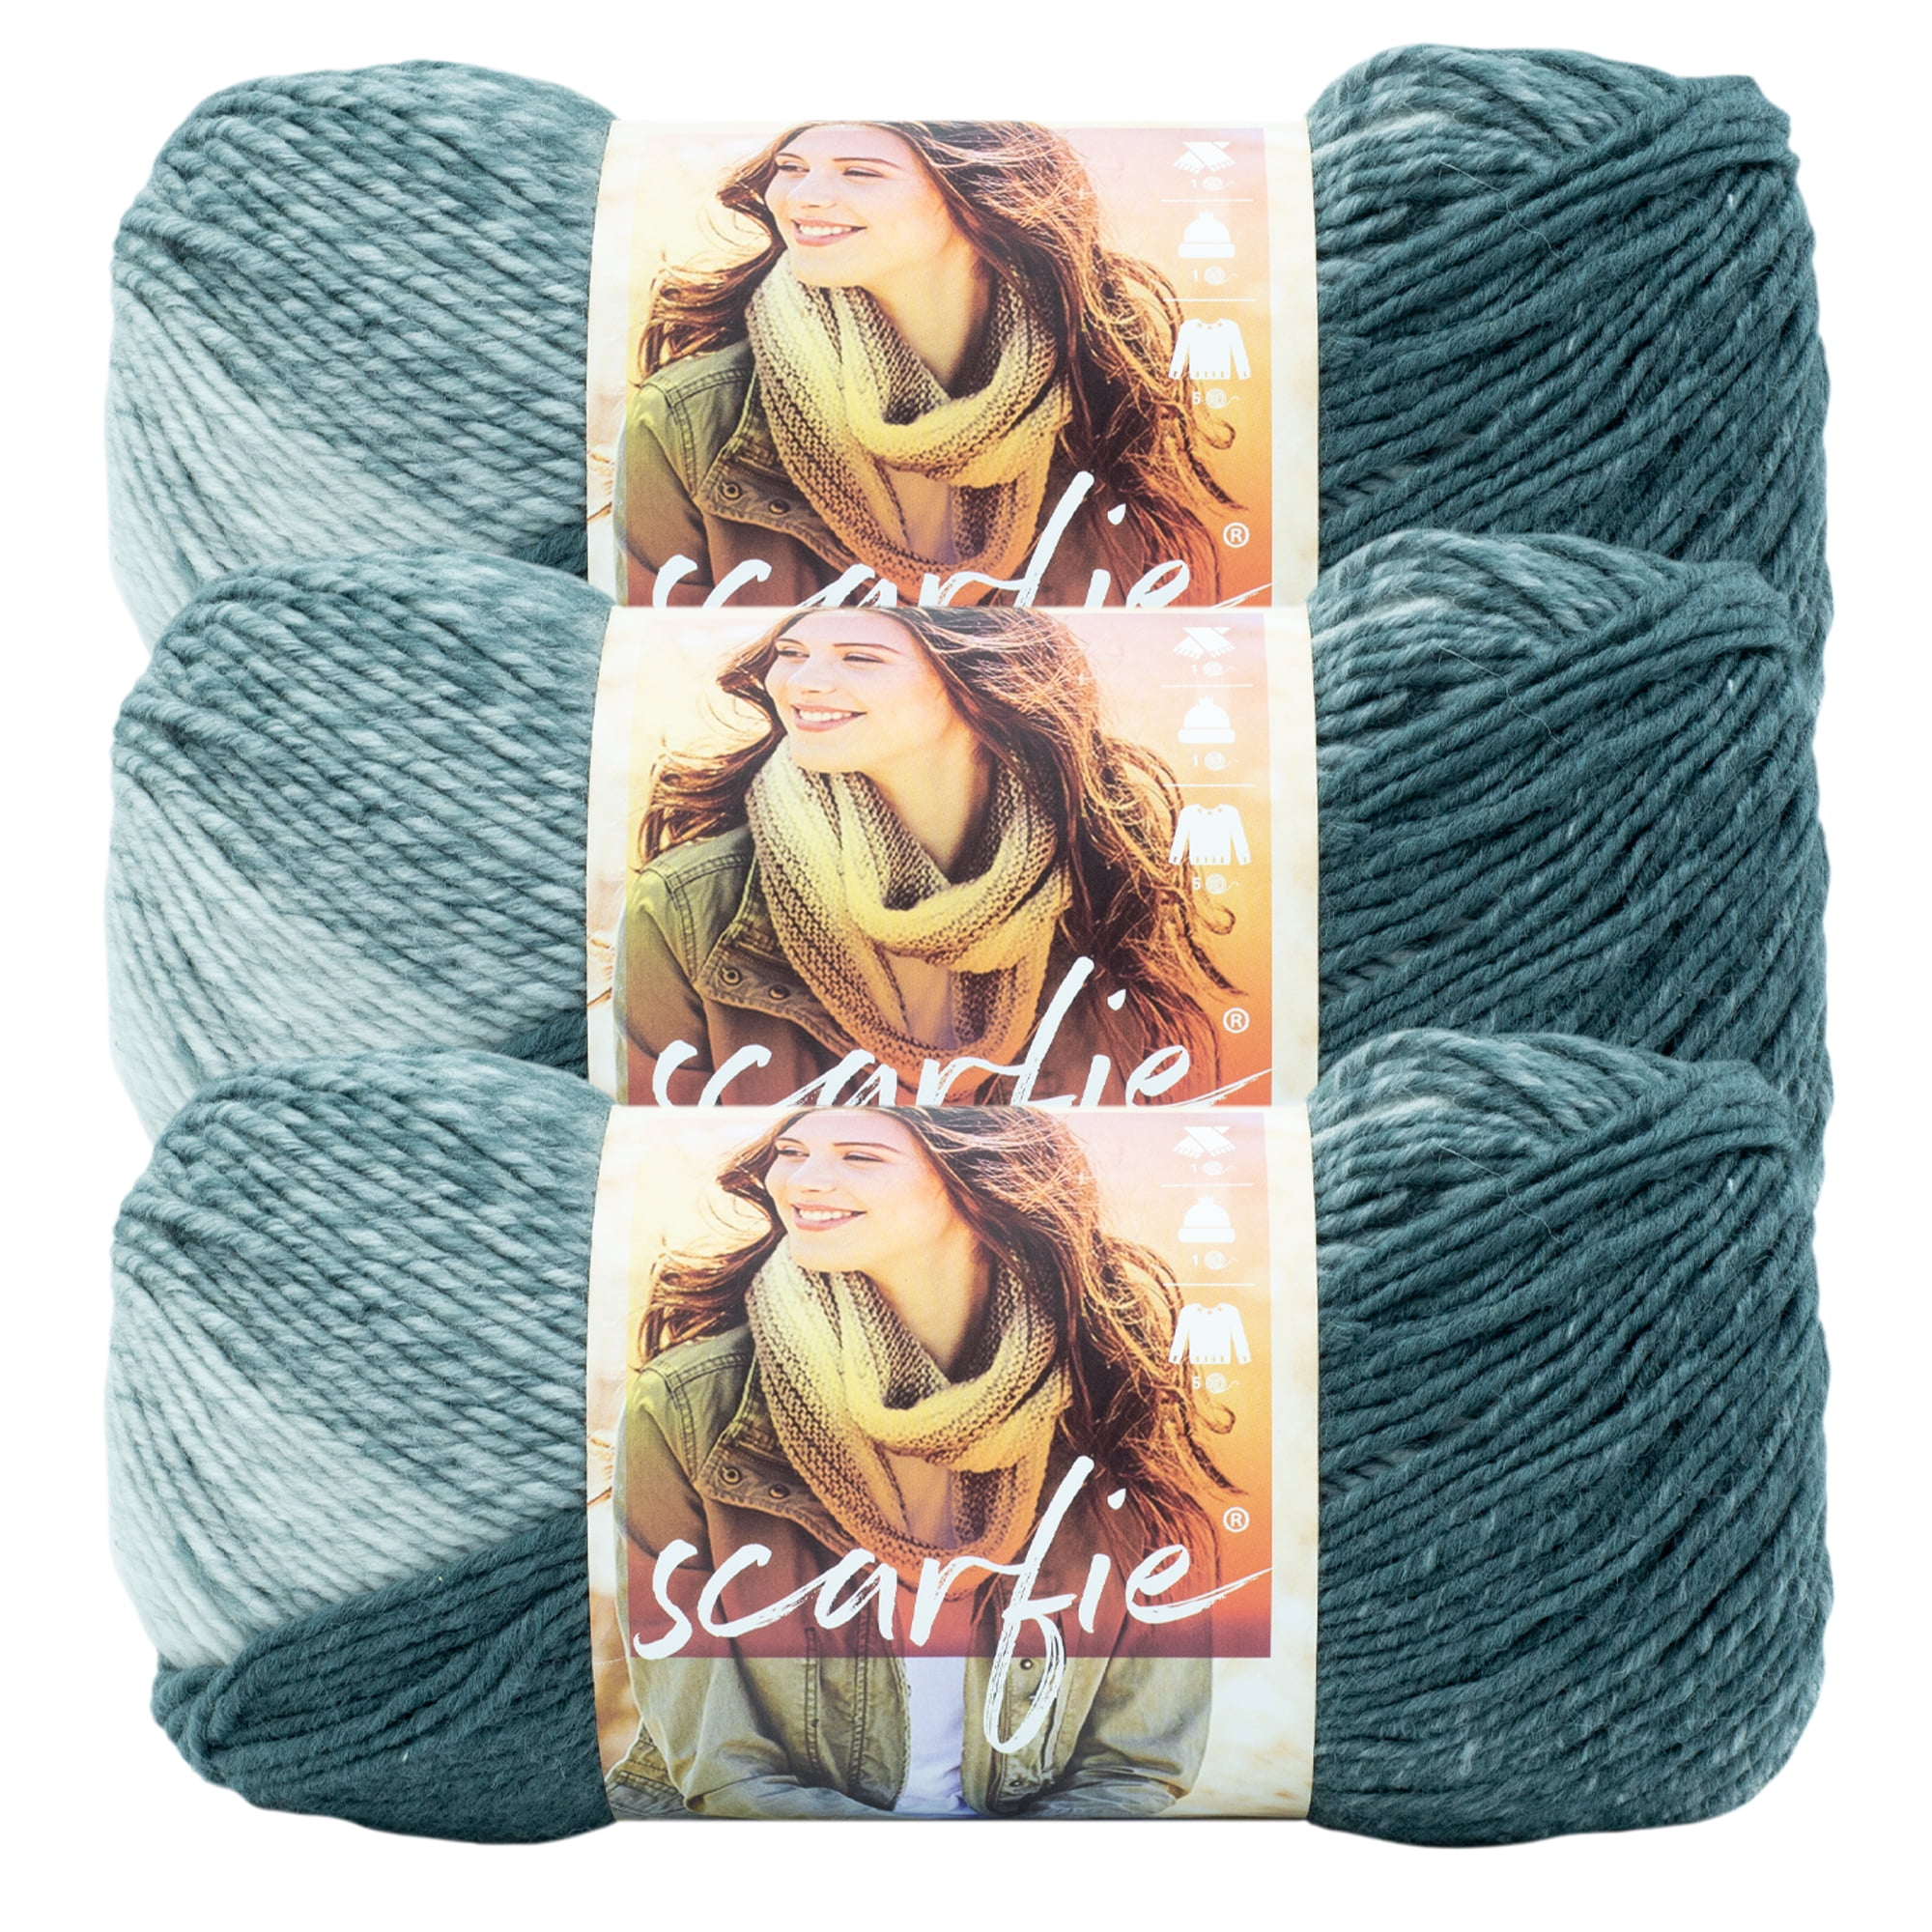 Lion Brand Yarn Scarfie Yarn, Multicolor Yarn for Crocheting, Knitting, and  Crafting, 1 Skein, Oxford/Claret